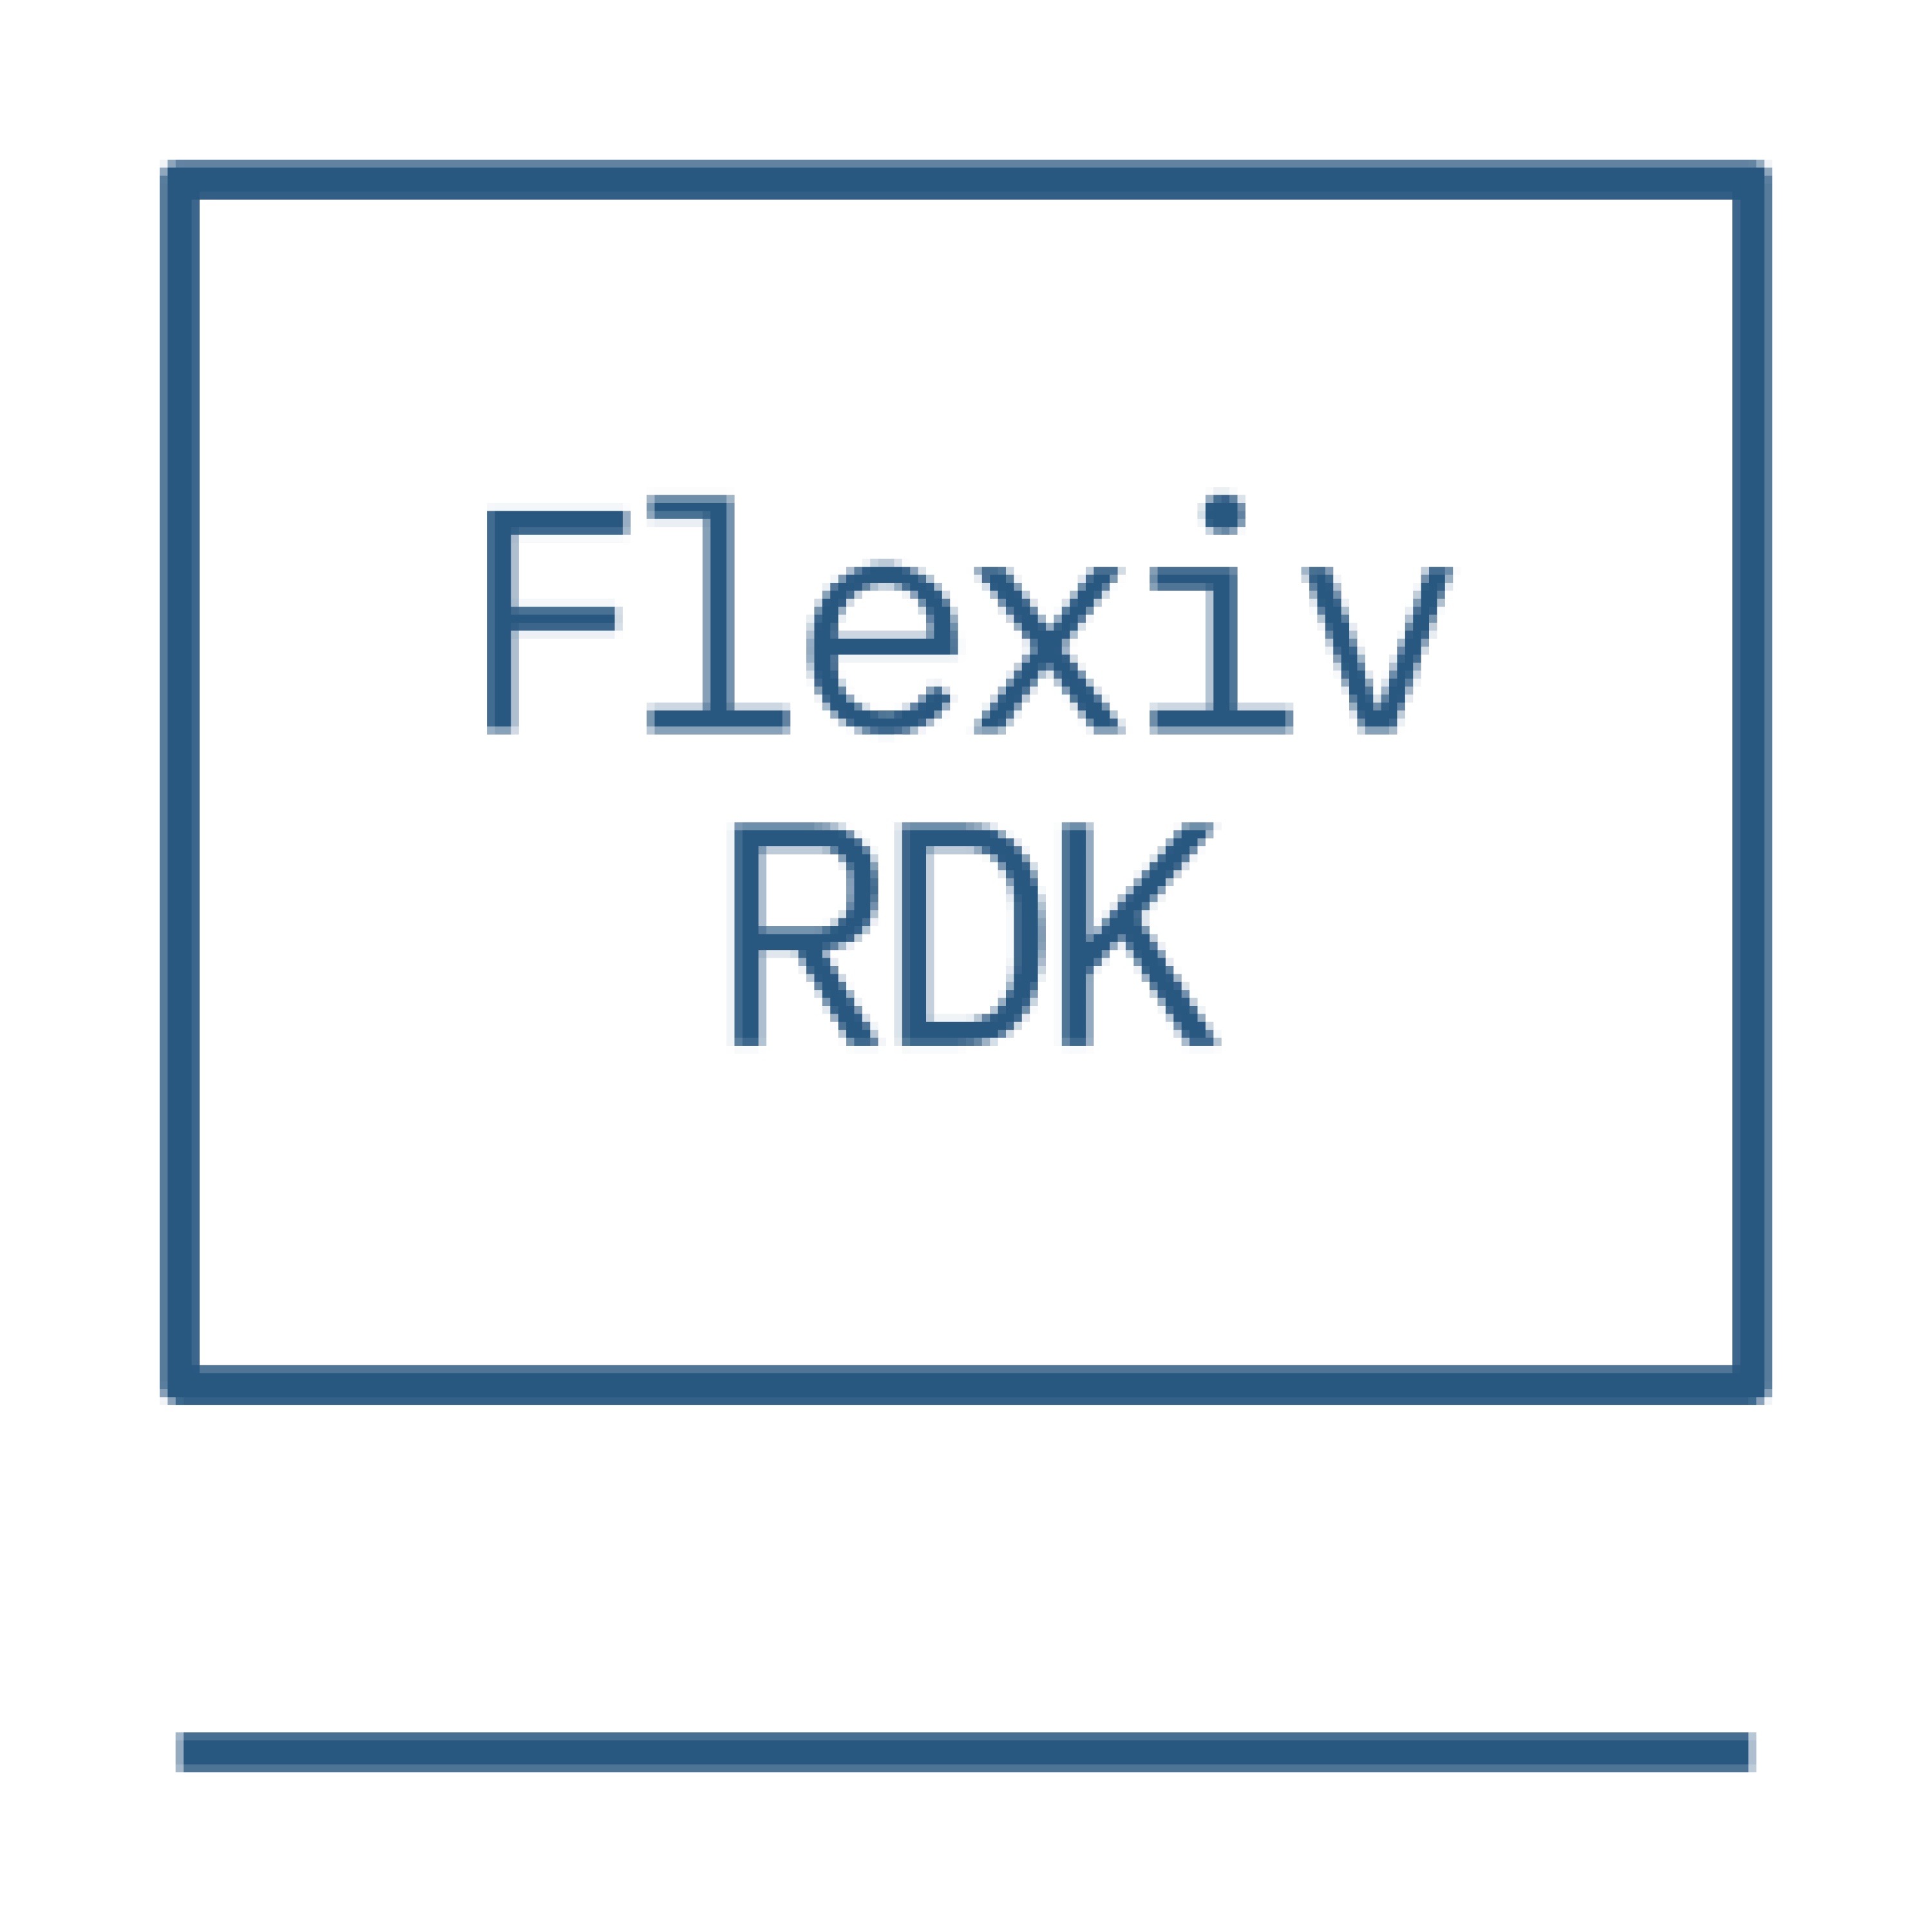 The development toolkit Flexiv RDK provided by Flexiv for robot developers can meet the needs of real-time data synchronization and comparison mapping. 